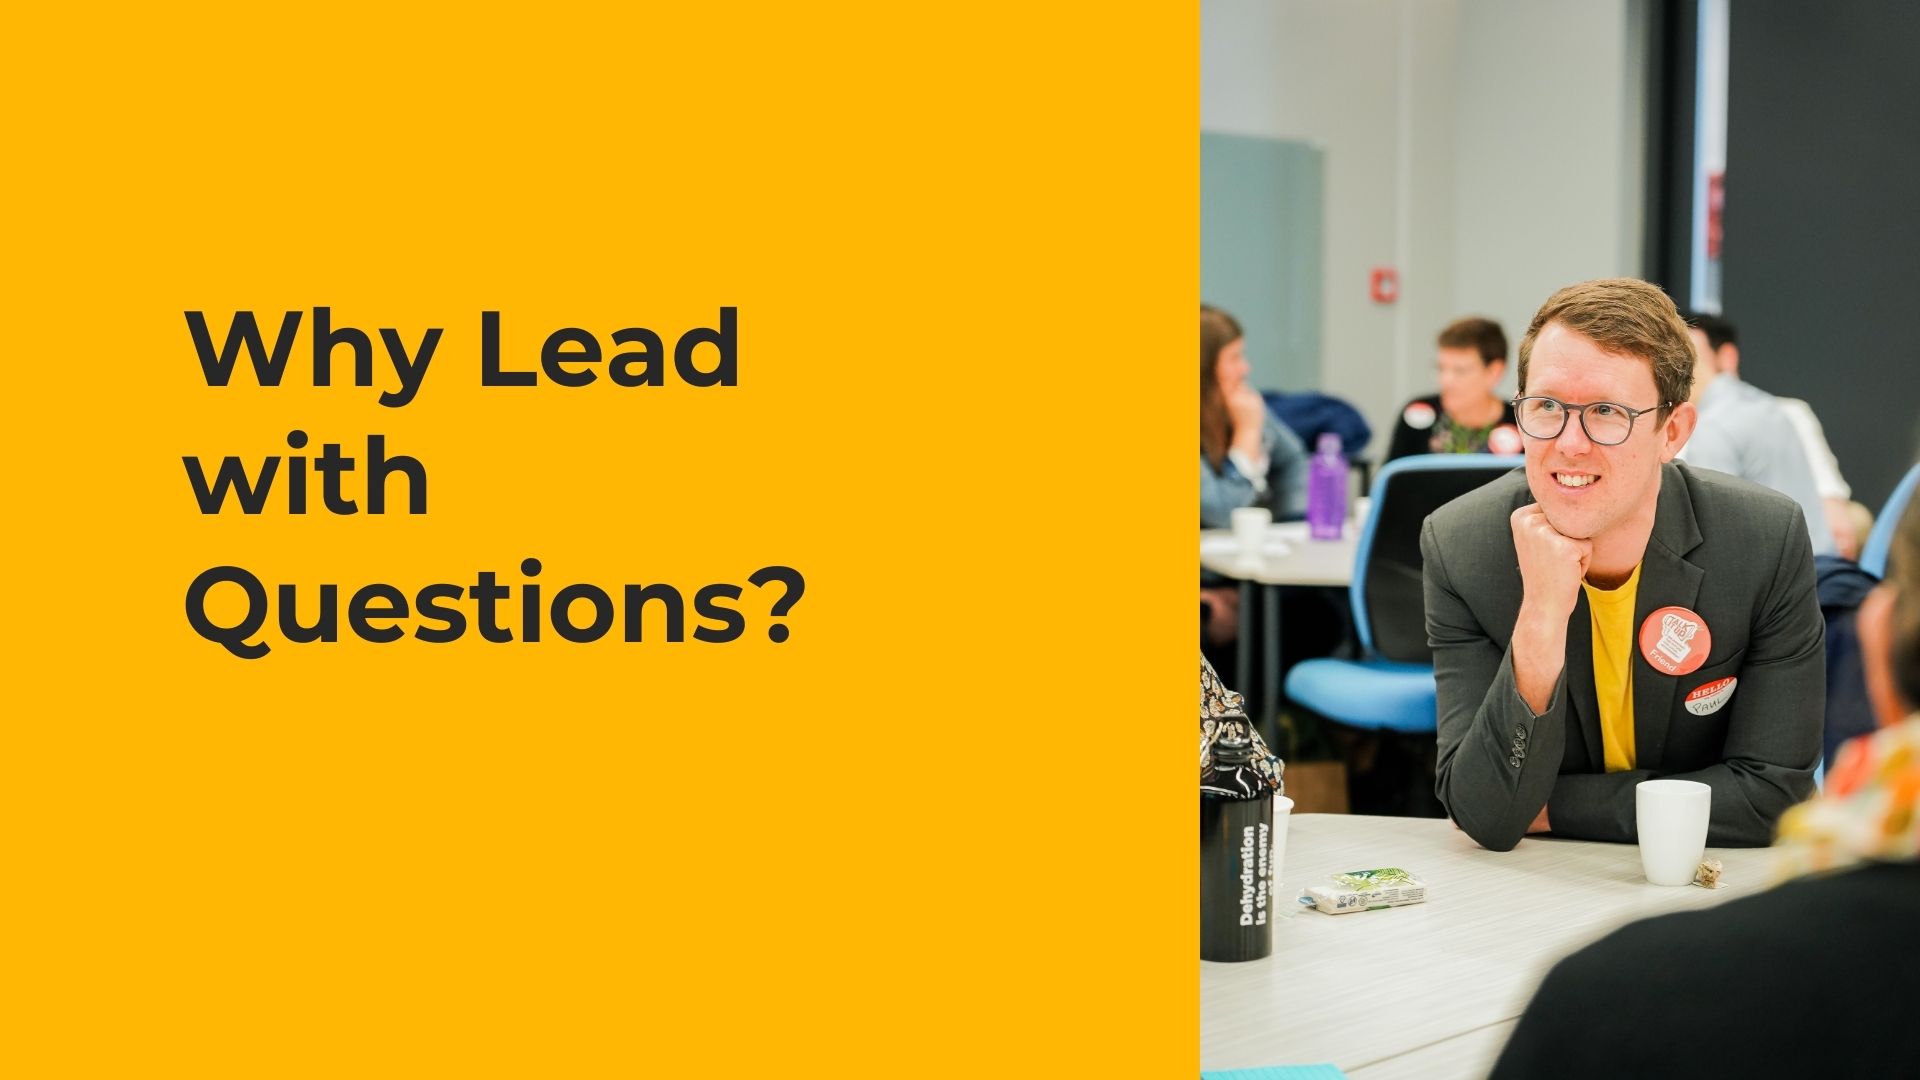 Why lead with questions?